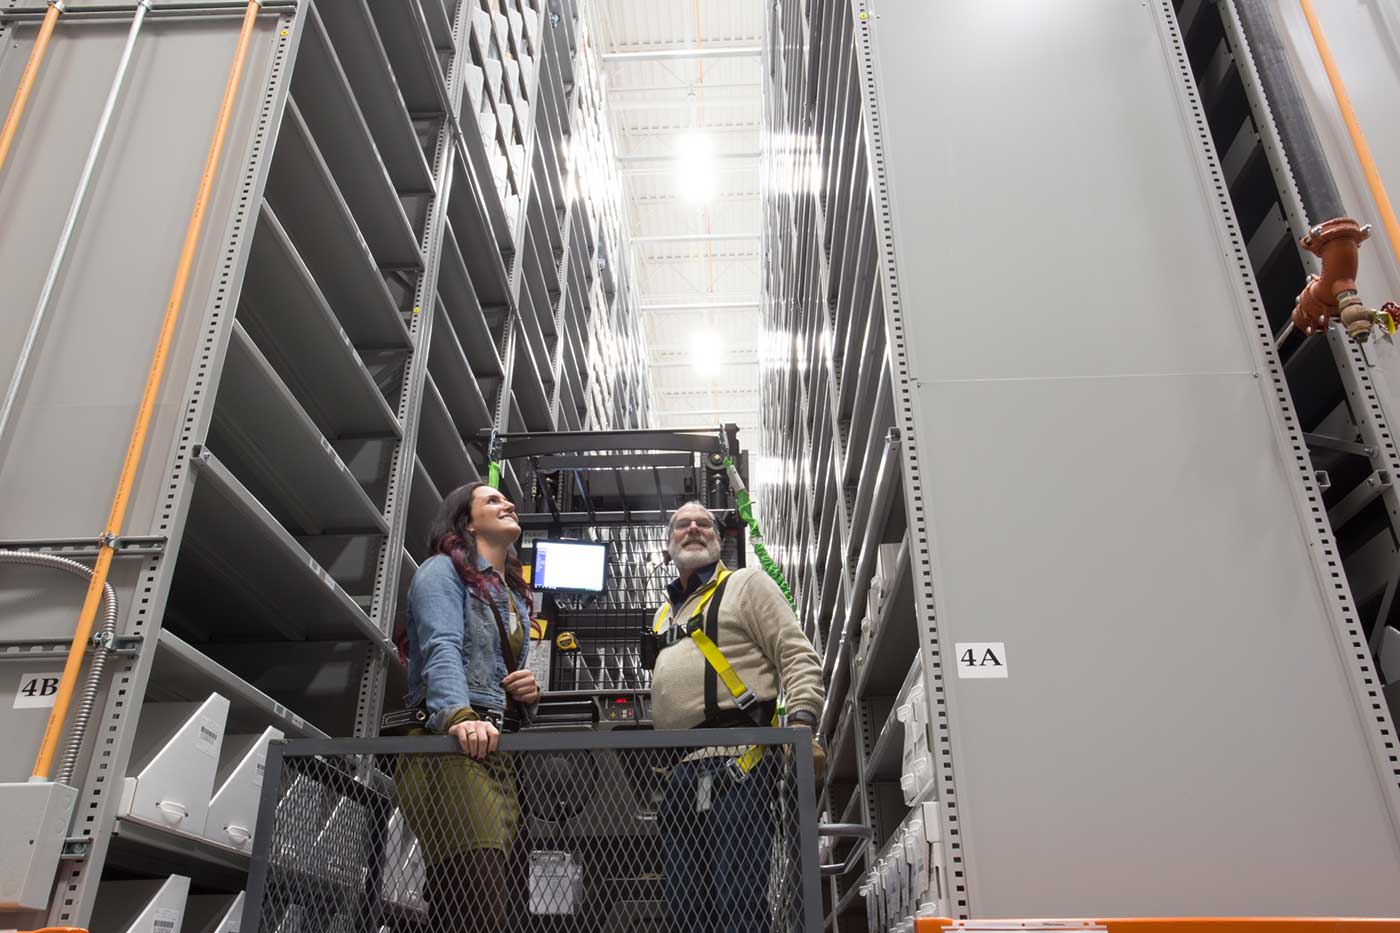 Two people on a lift in between two high-bay shelving stacks